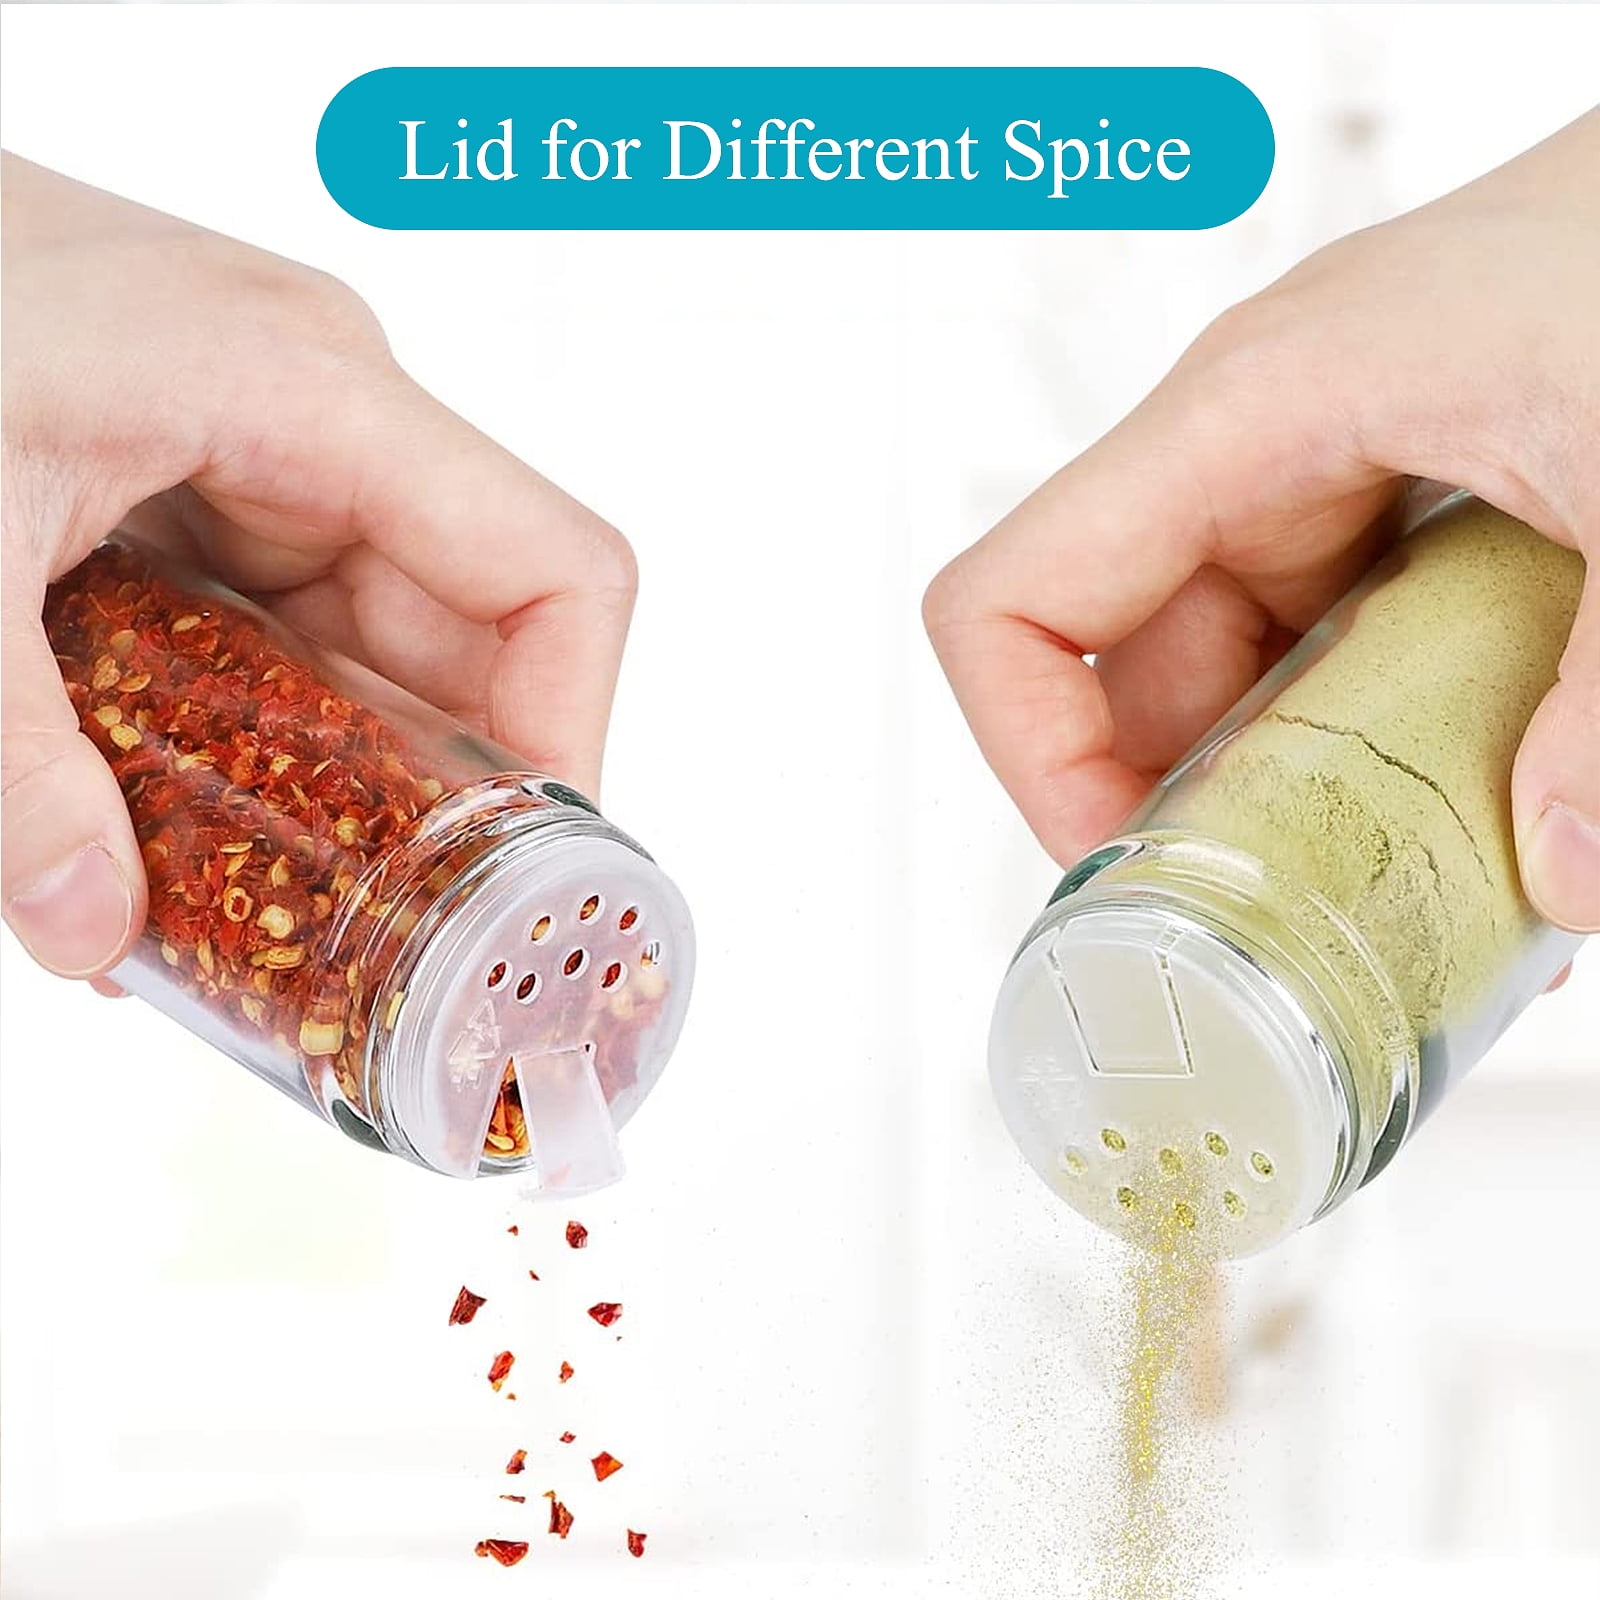 S-Box™ Spice Organization Pop-Up - Stainless Top CLEARANCE – S-BOX USA